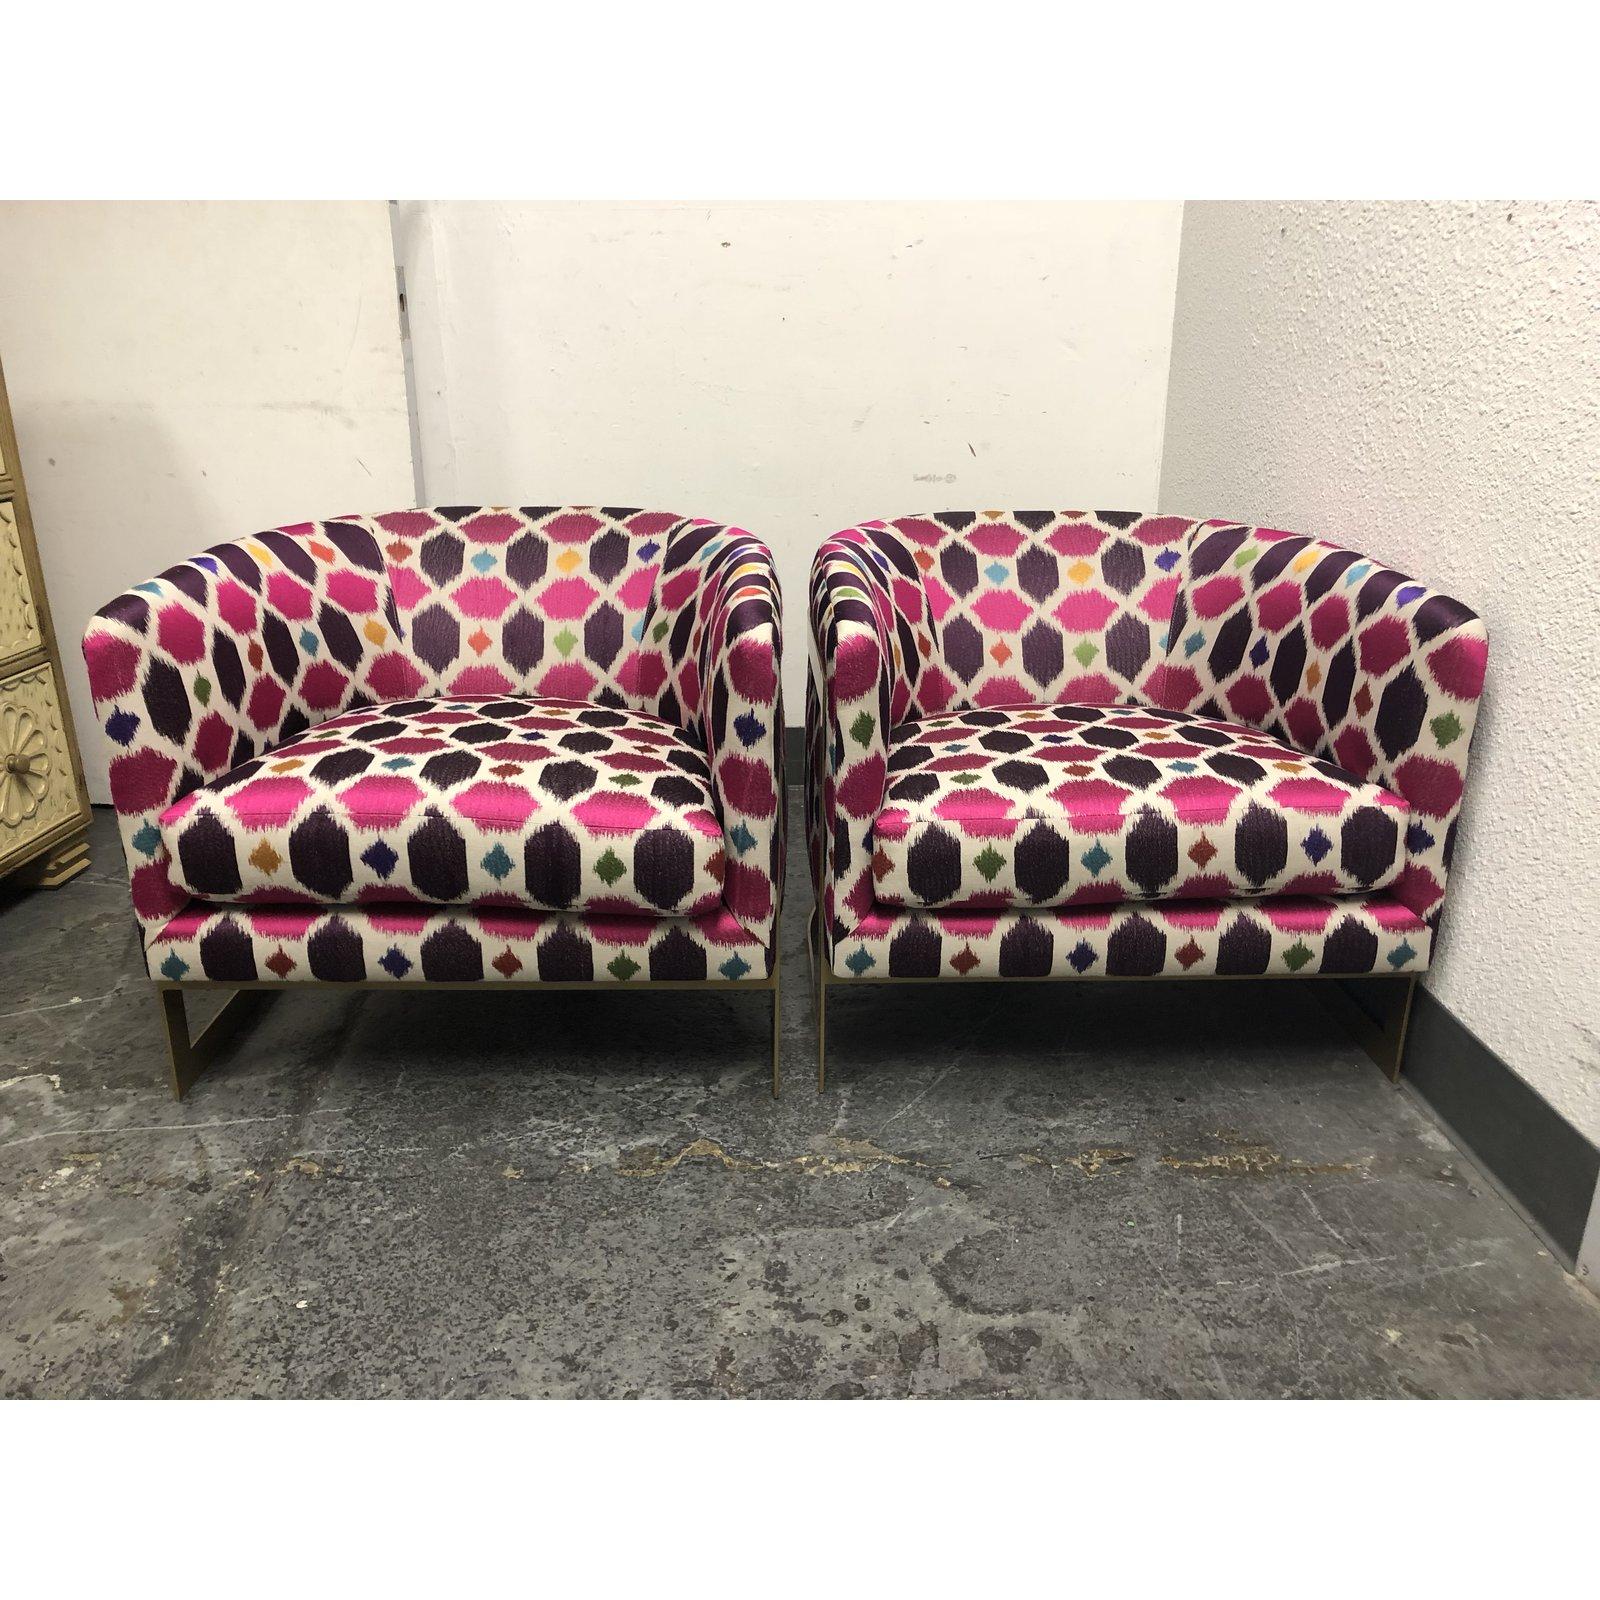 Pair of Nathan Anthony Korz Chair by Tina Nicole and Kravet Fabric For Sale 1